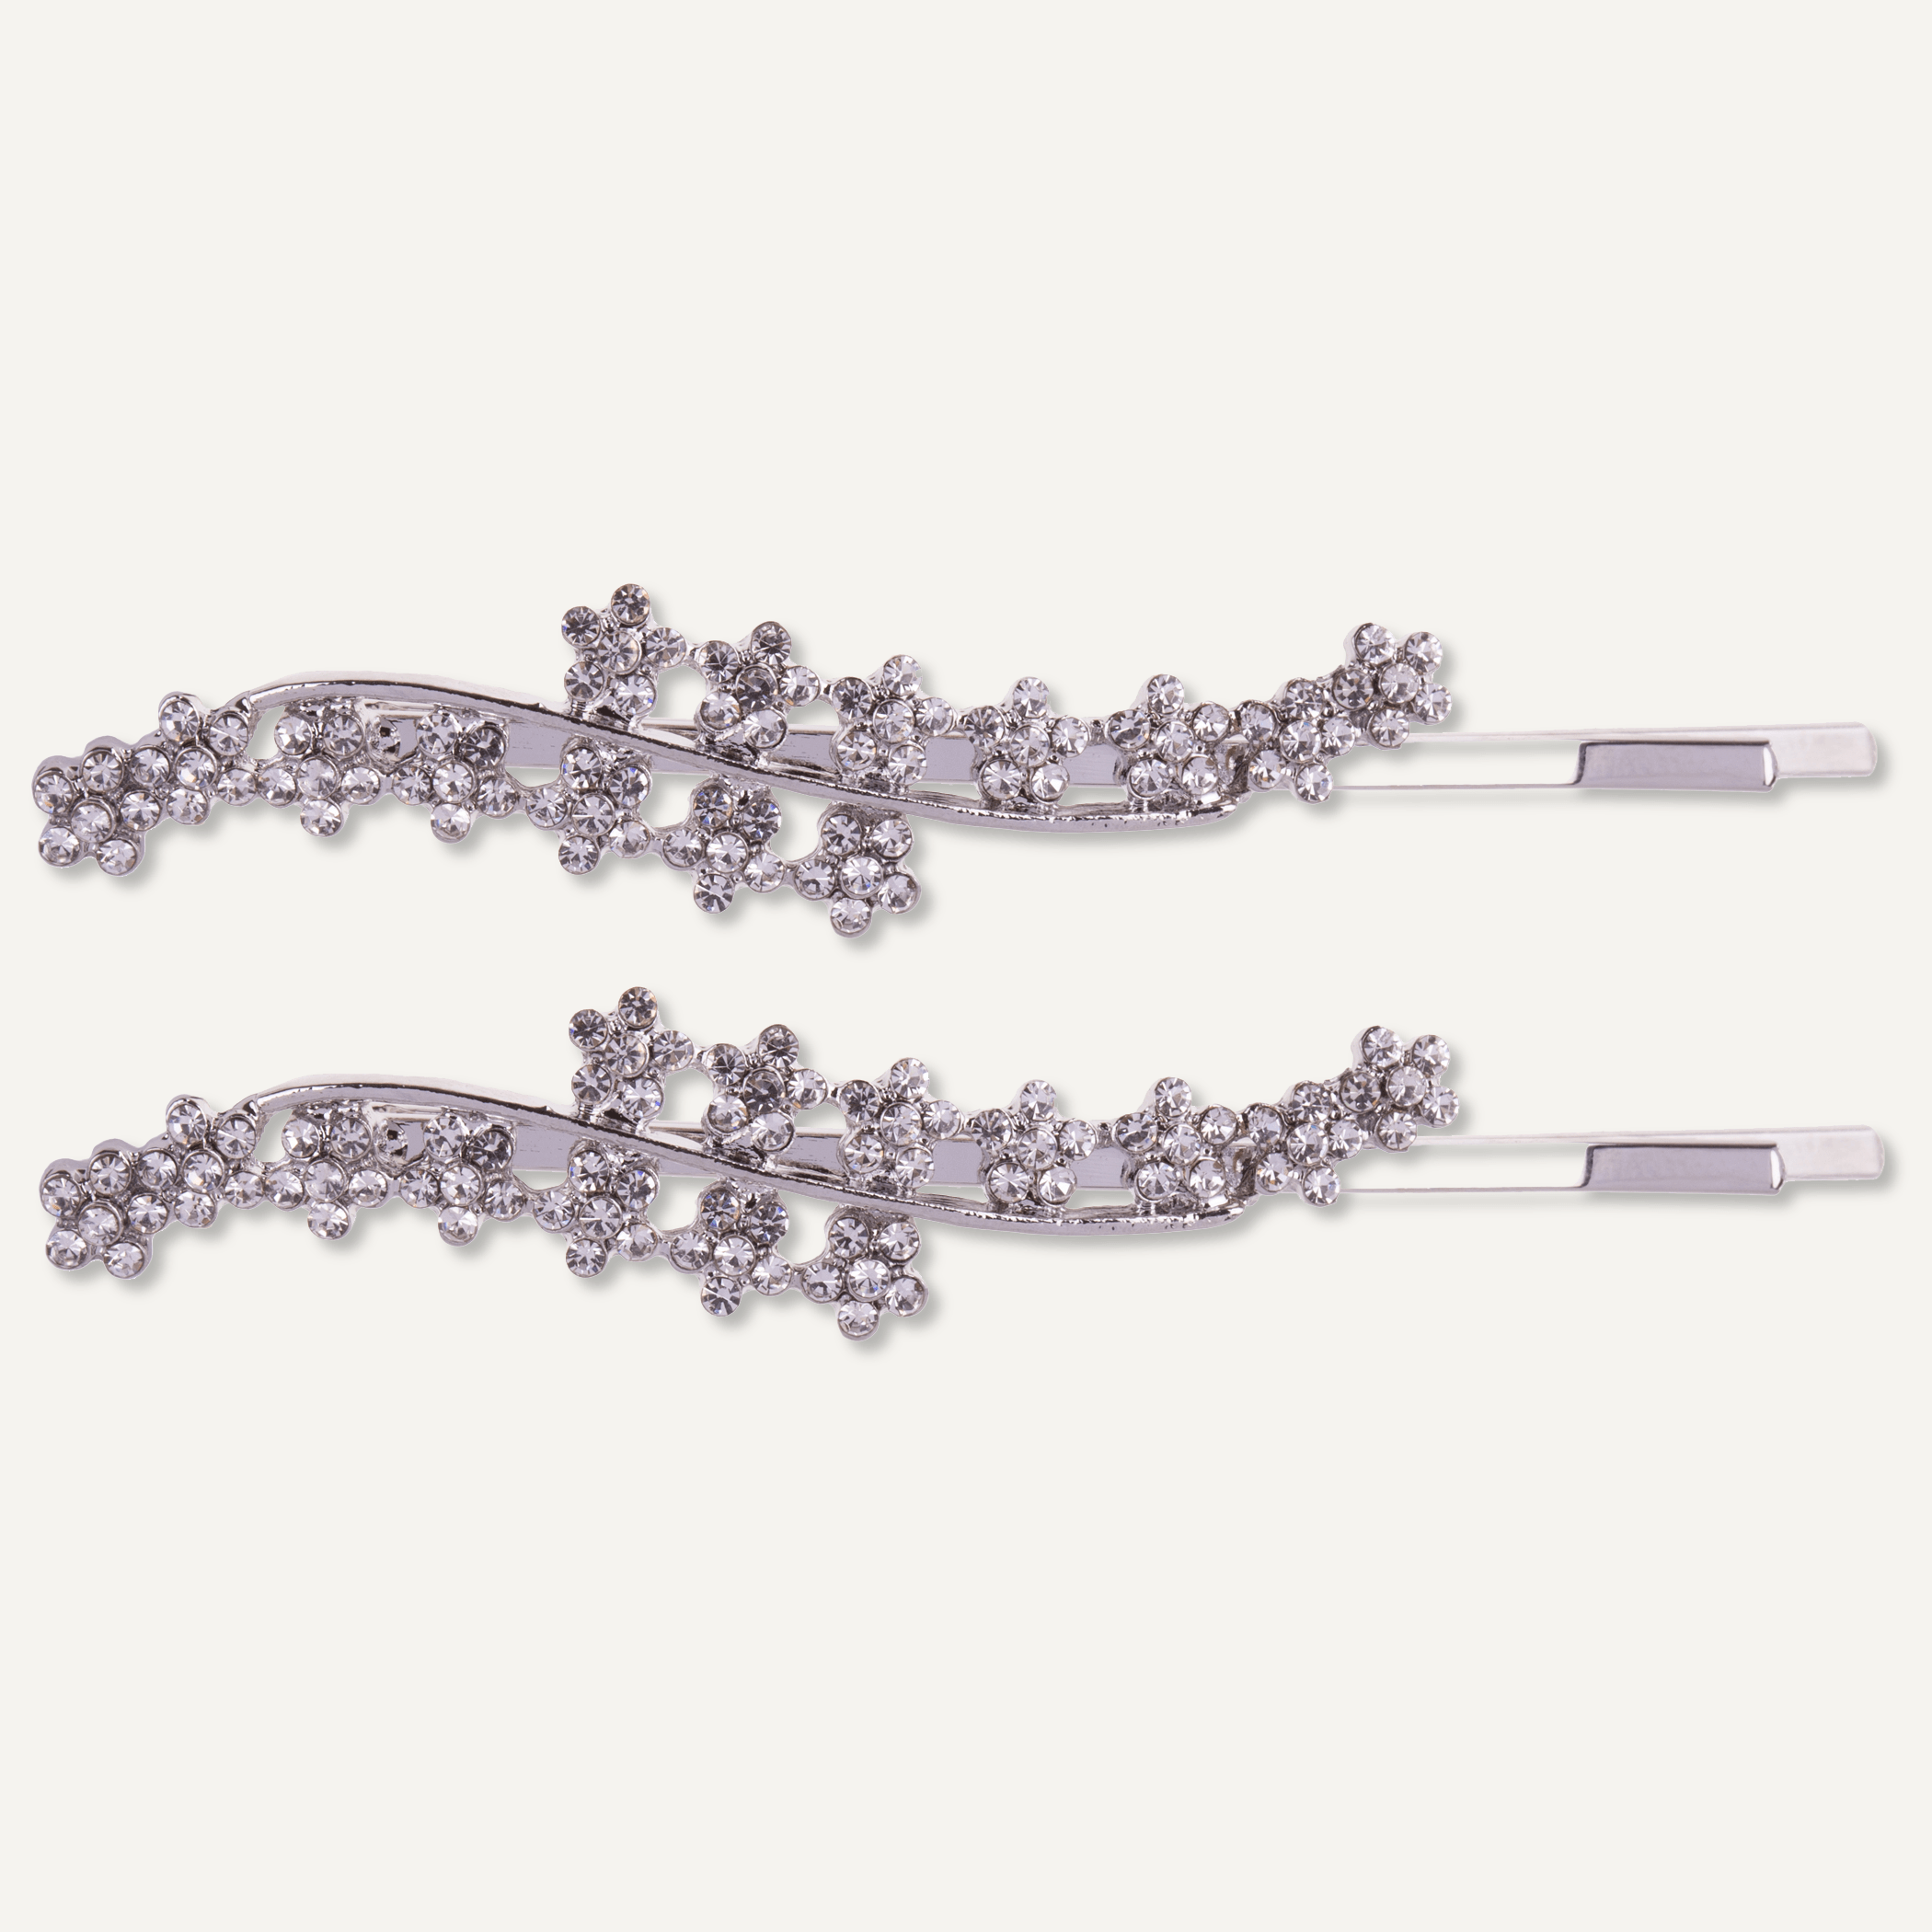 Kylie Silver & Crystal Floral Hair Slides - Set of 2 - D&X Retail